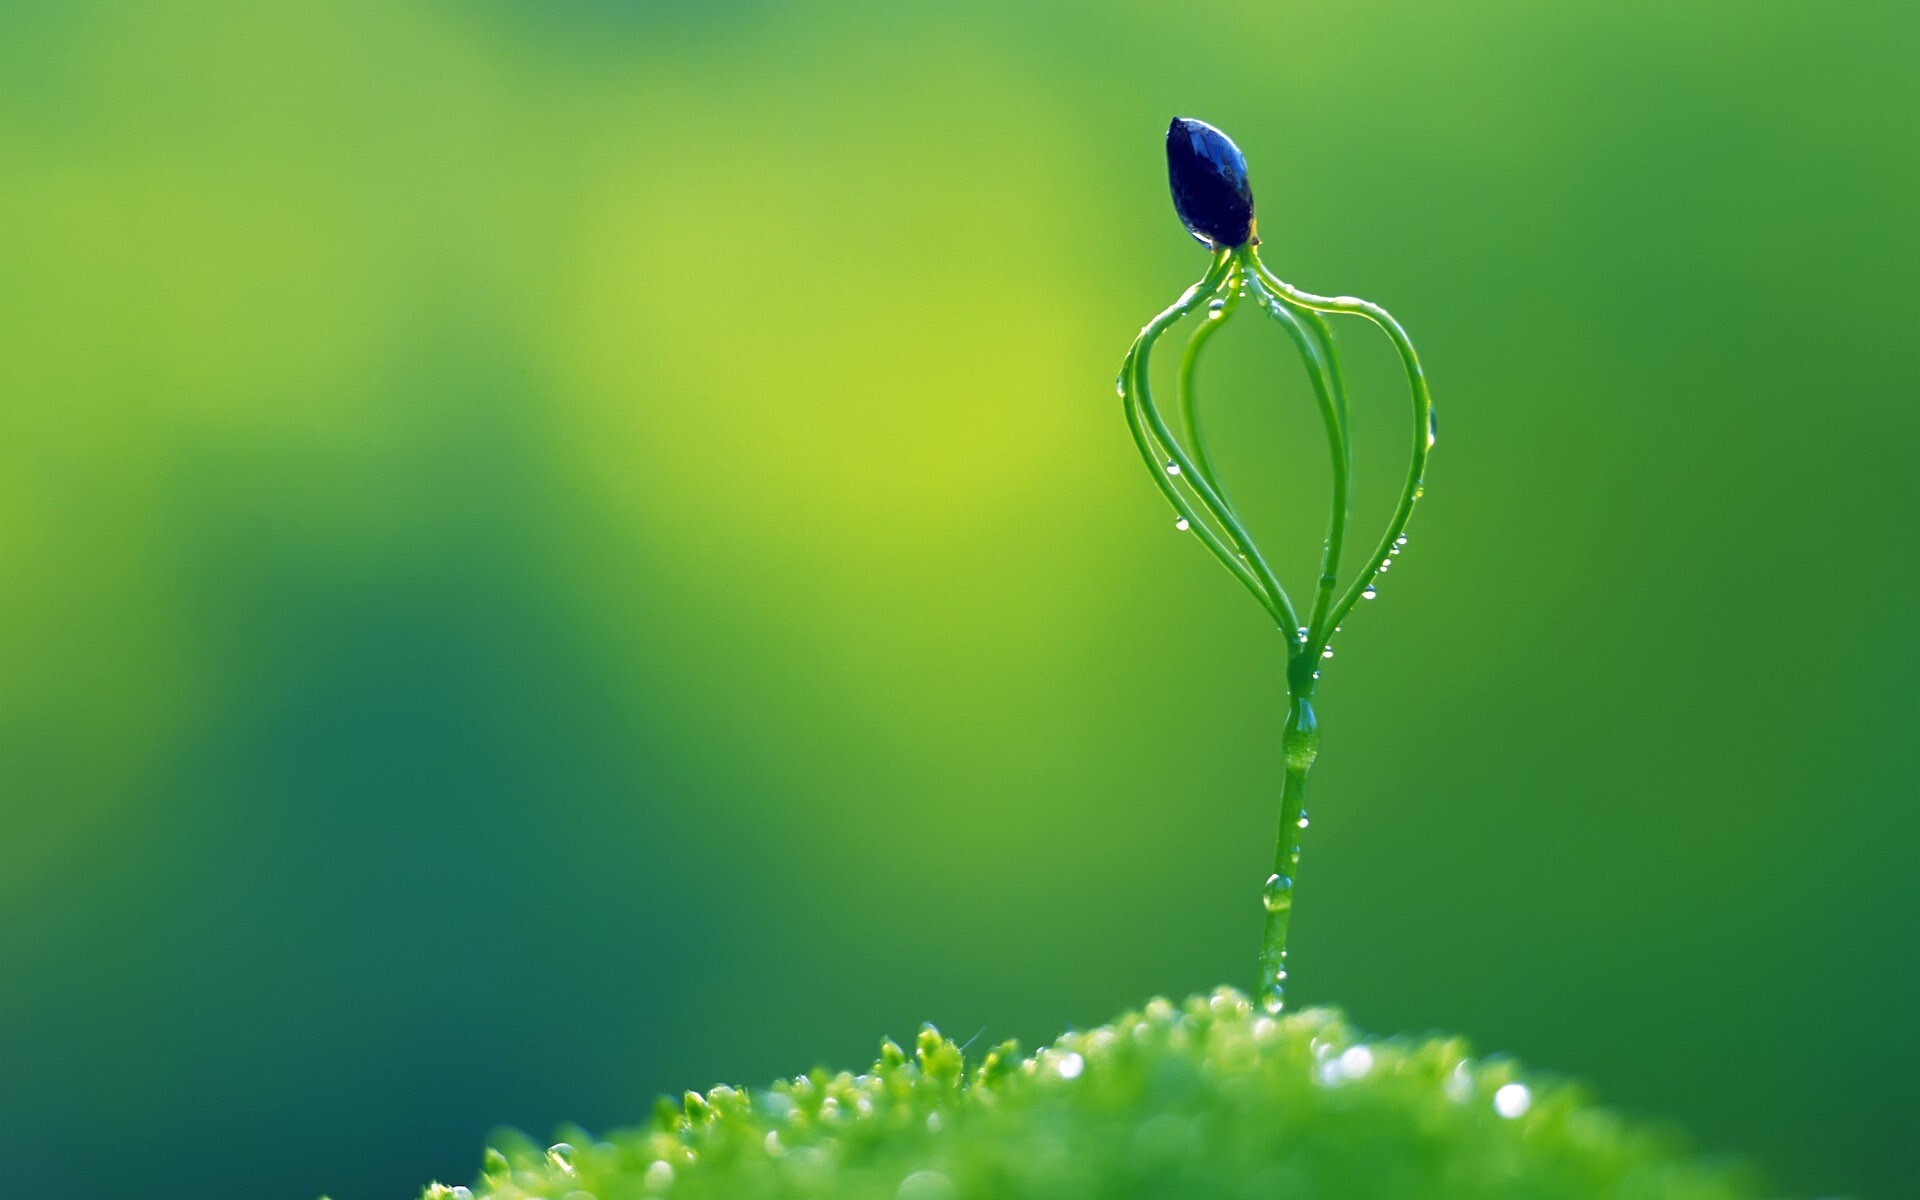 Go Green: Untouched natural beauty, Water droplets on the stem, Drops of moisture. 1920x1200 HD Wallpaper.